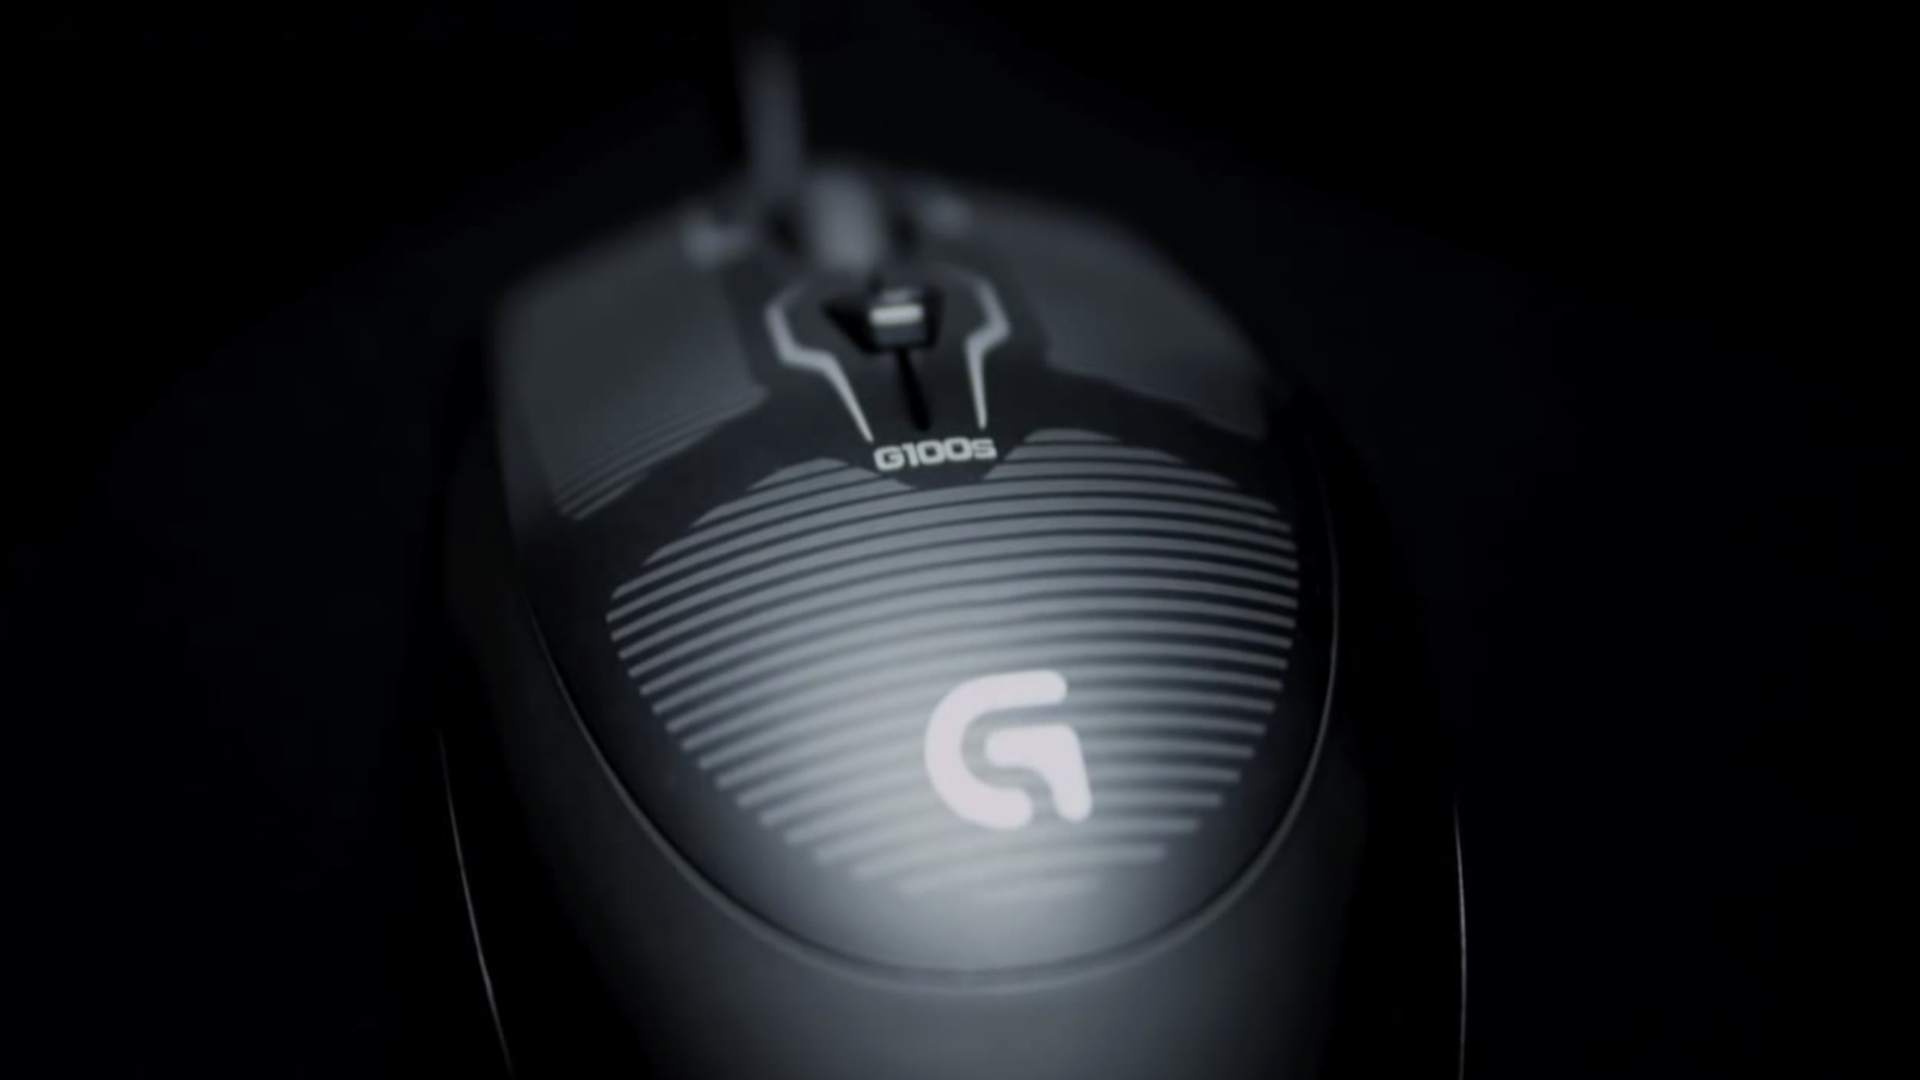 Optical Gaming Mouse G100s Logitech